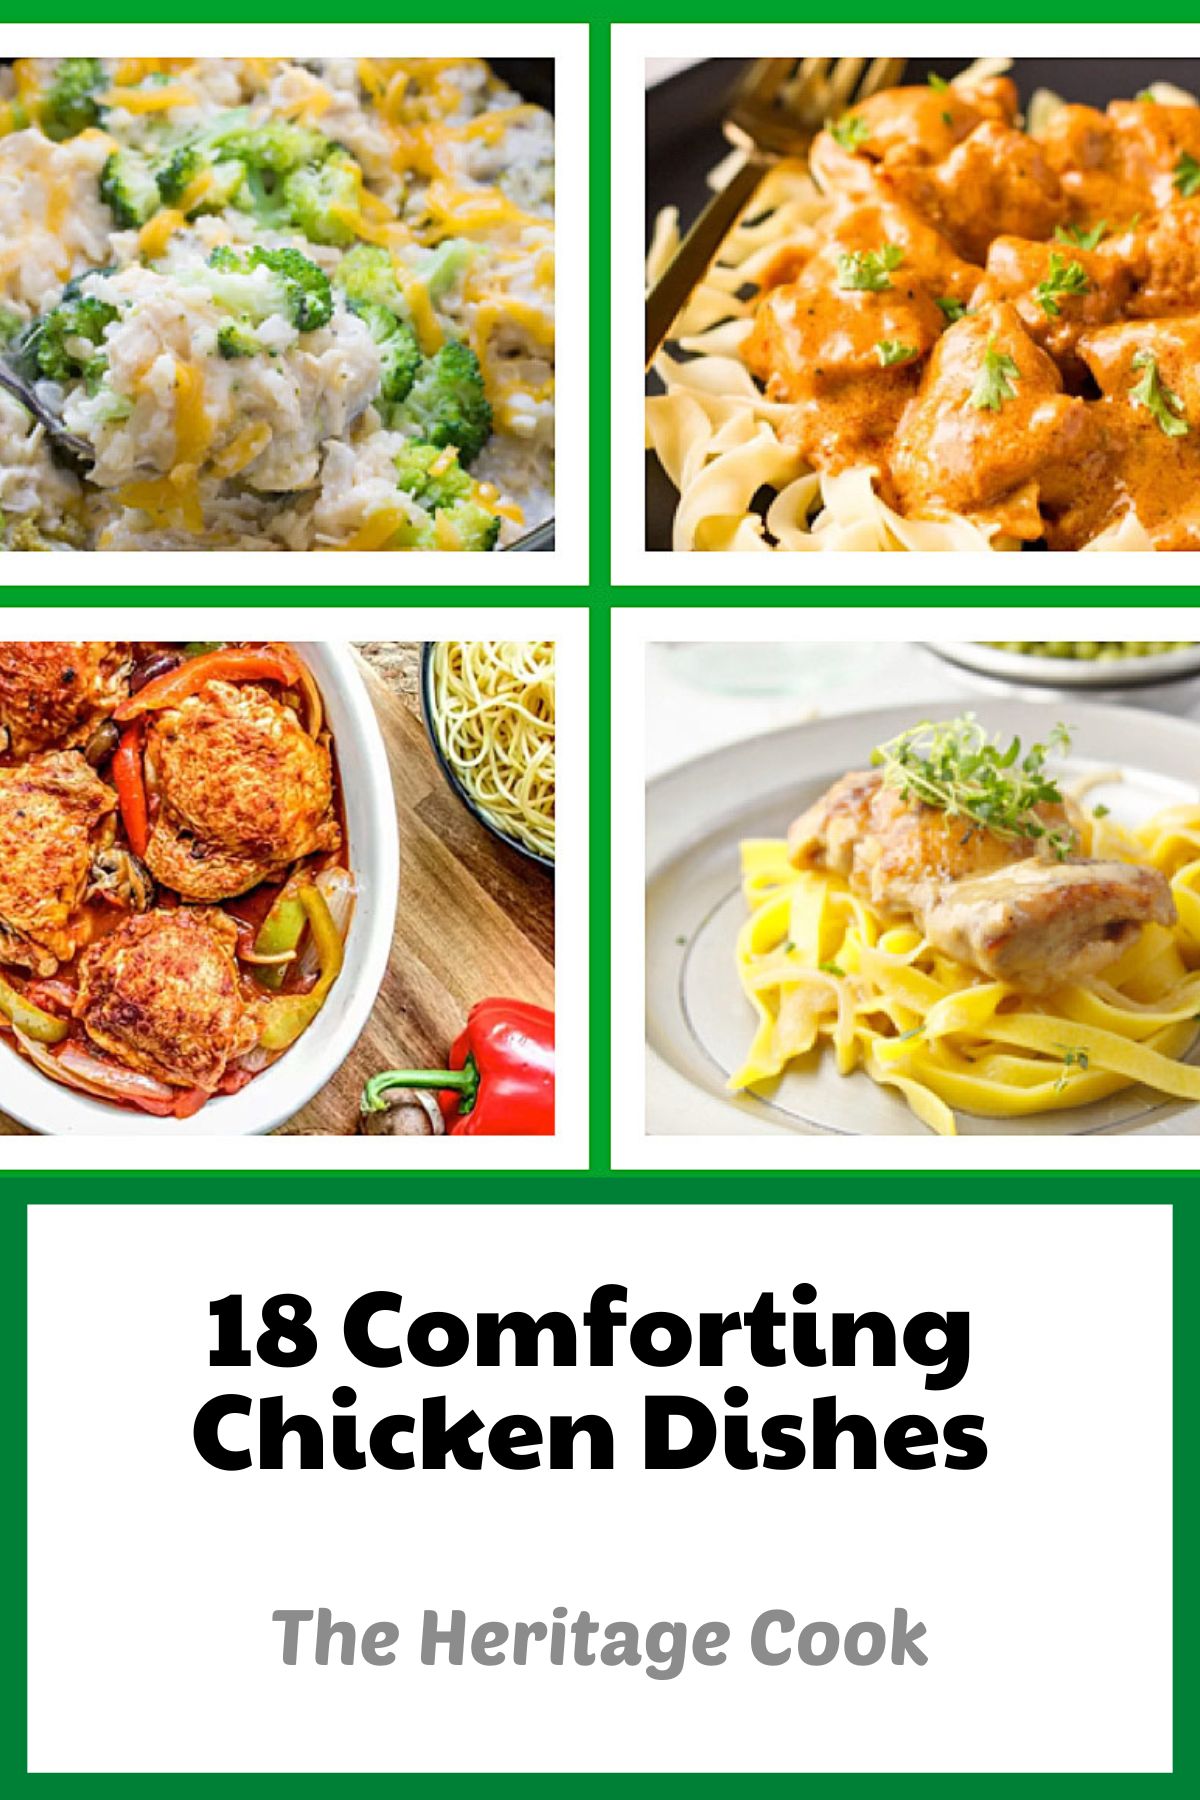 Collection of 18 Comforting Chicken Dishes for any occasion to make your meal planning easier; compiled by Jane Bonacci, The Heritage Cook 2023. 